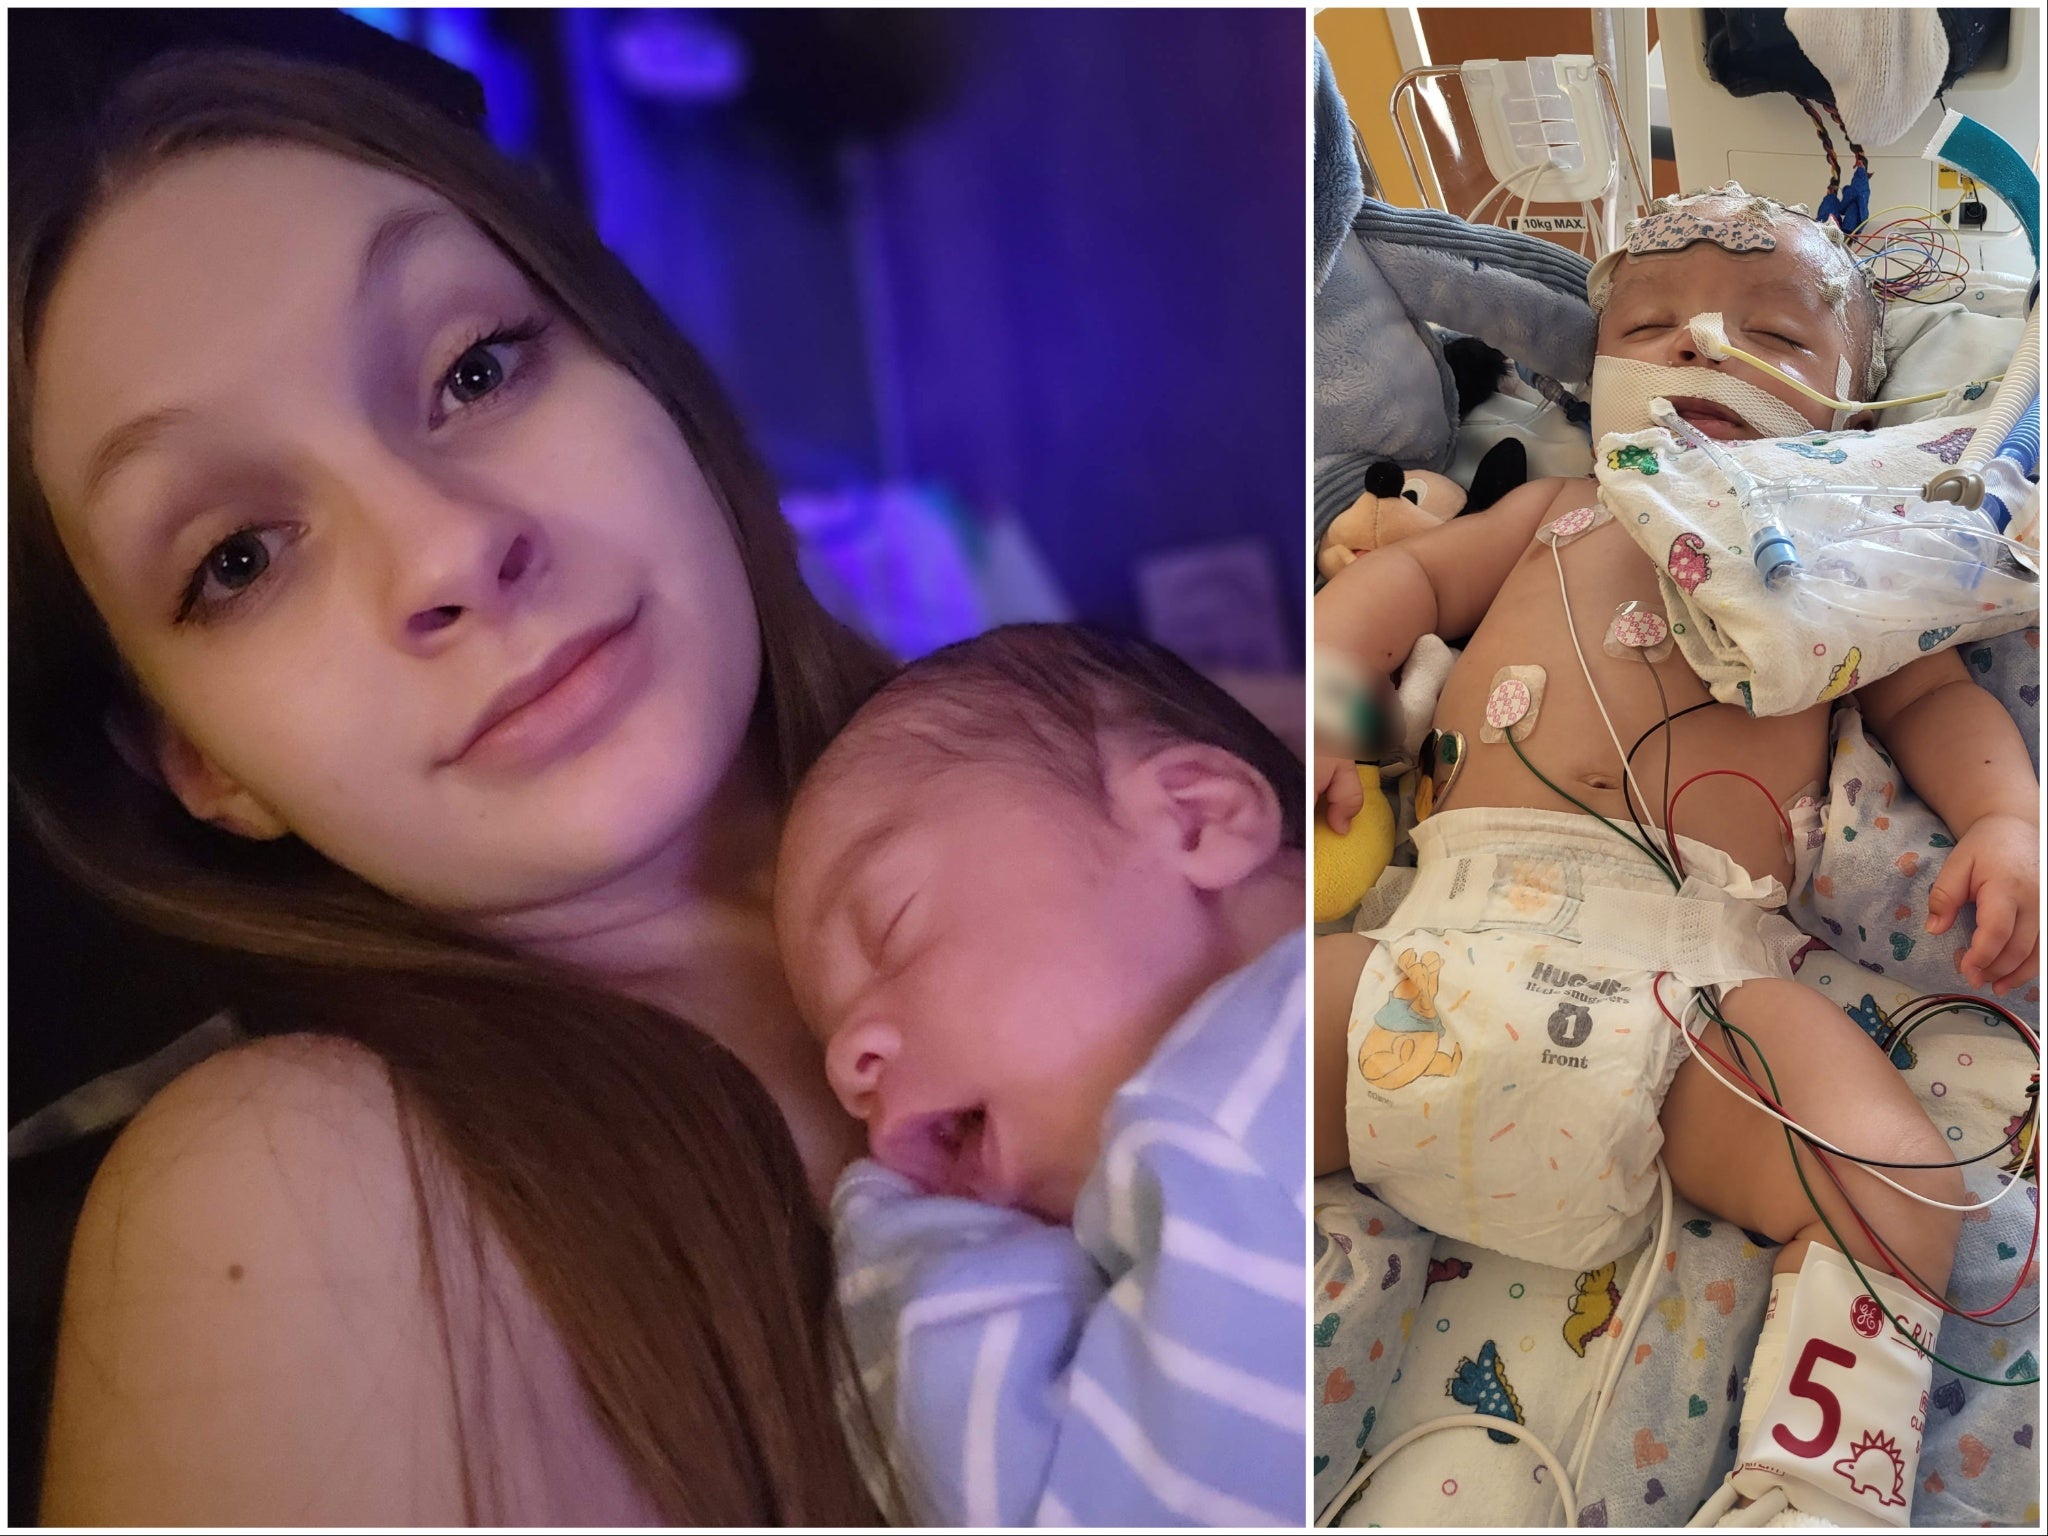 Breanna Brown, 22, found her young son 75 per cent braindead after she and her husband fell asleep with their son between them